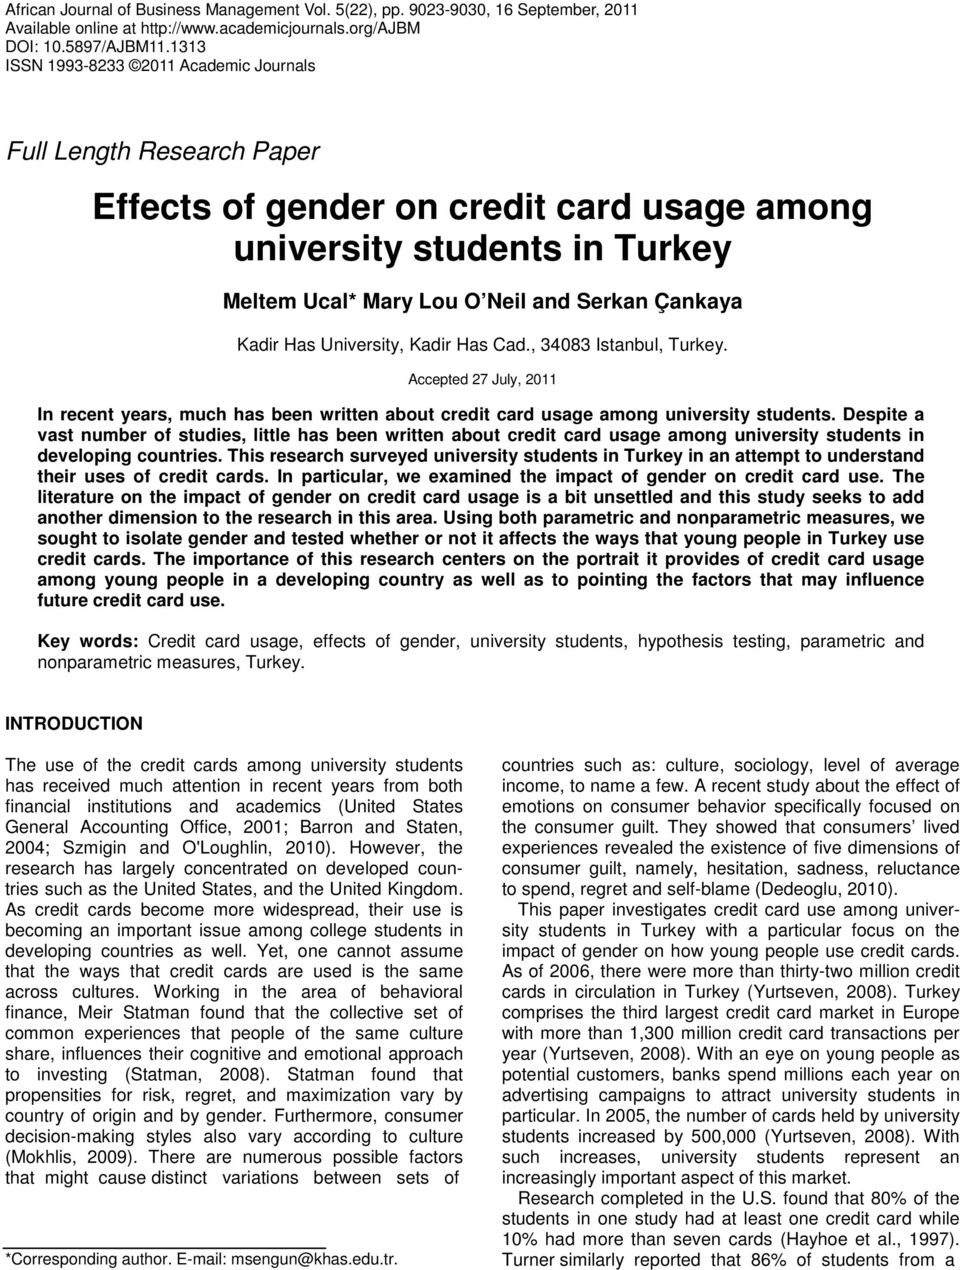 Has University, Kadir Has Cad., 34083 Istanbul, Turkey. Accepted 27 July, 2011 In recent years, much has been written about credit card usage among university students.